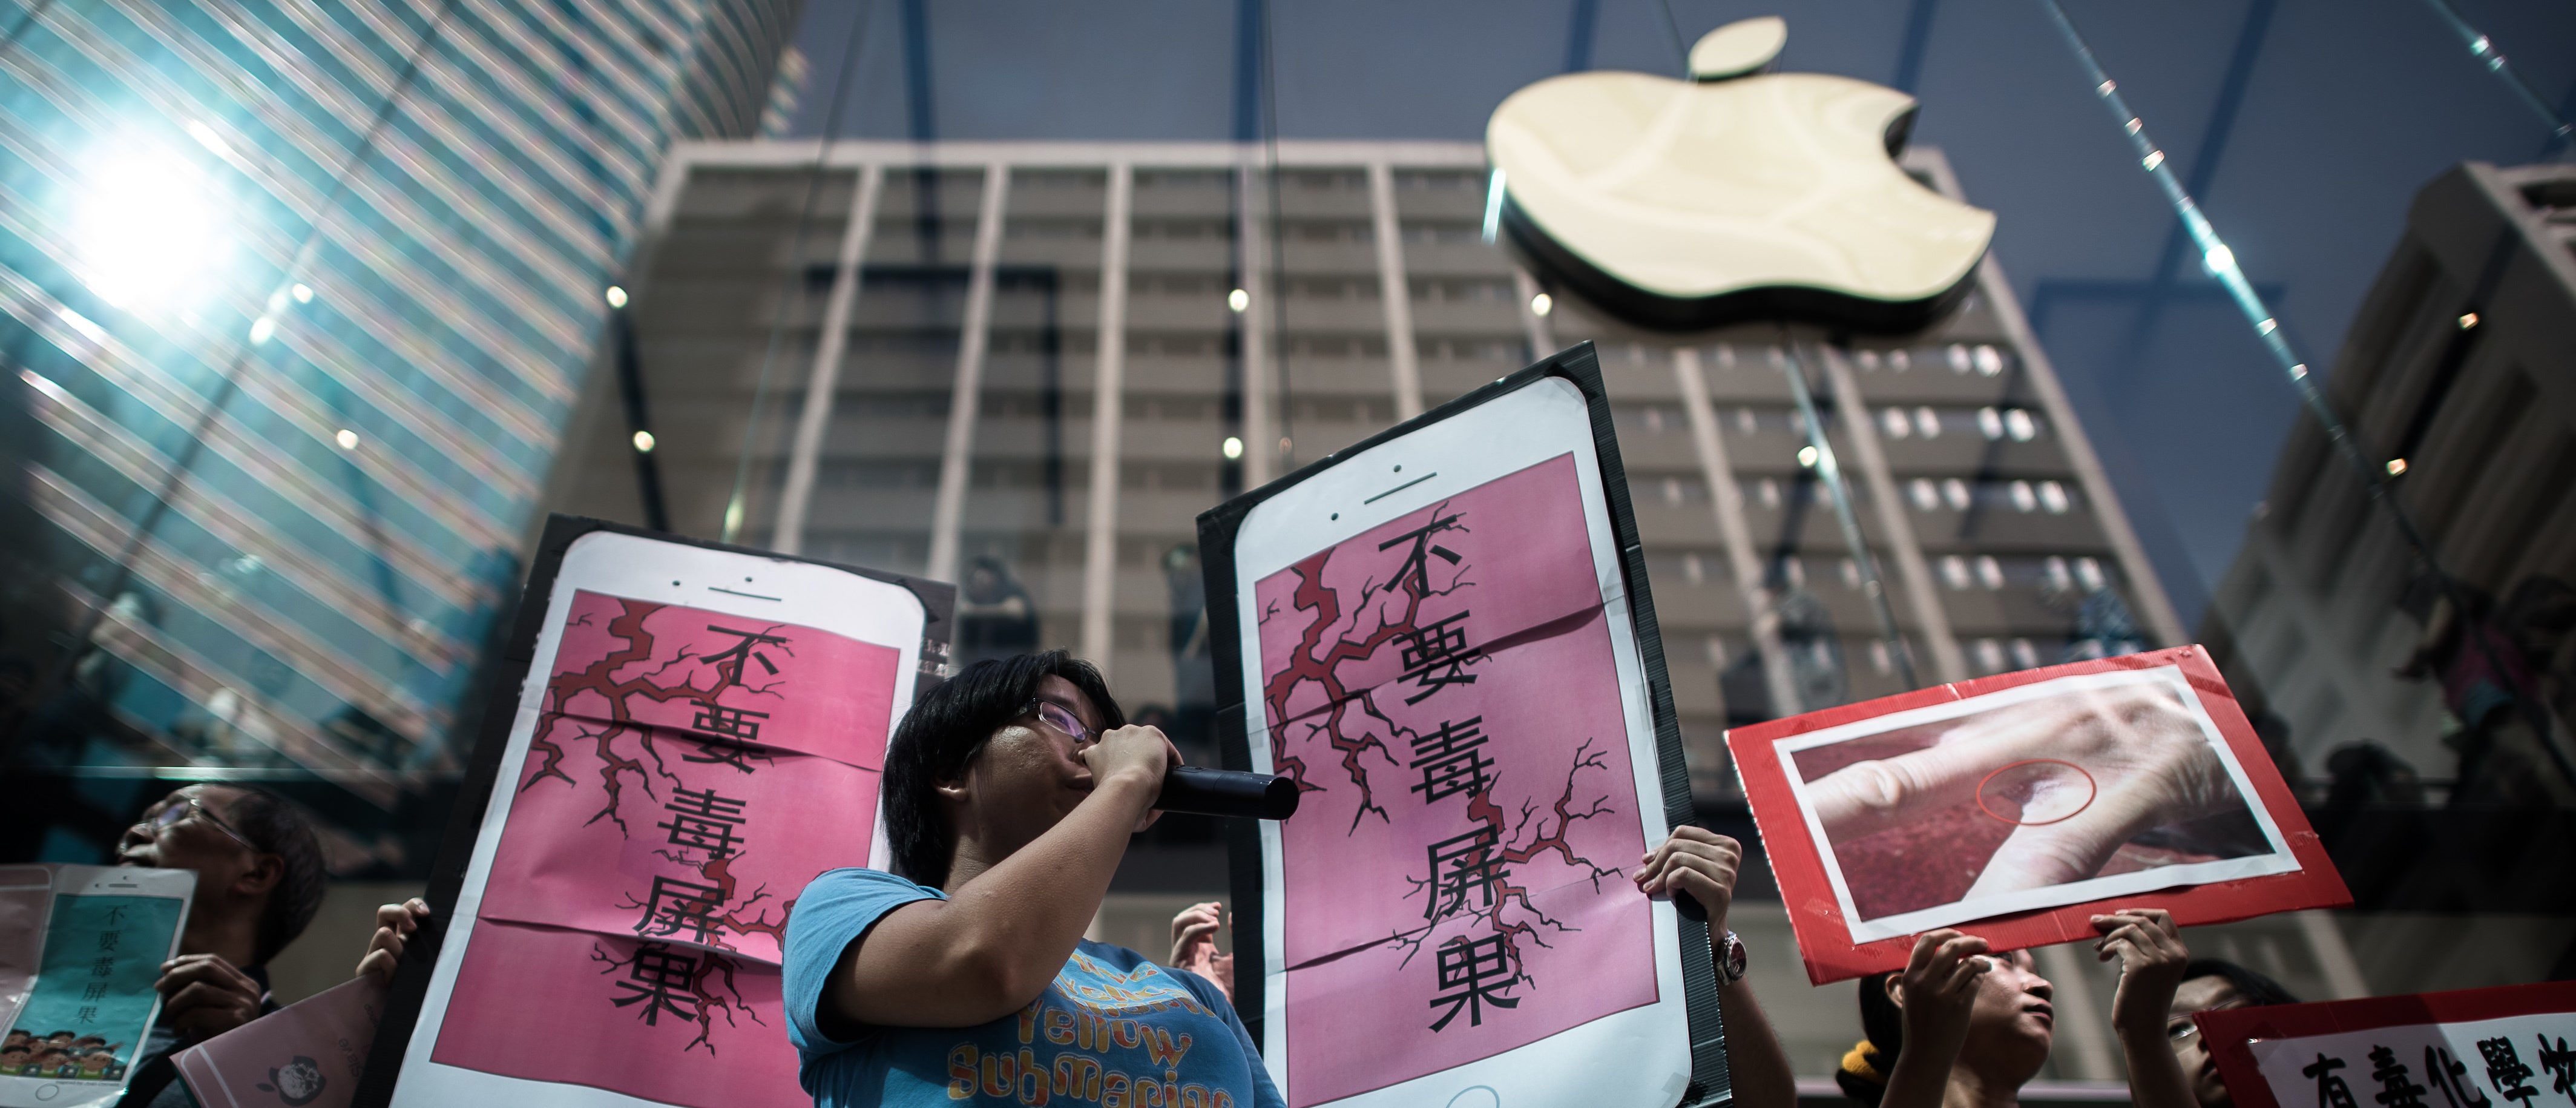 Rights campaigners stage a protest coinciding with the launch of the new iPhone 6s outside an Apple store in Hong Kong on September 25, 2015. Apple was urged to act as rights campaigners said a Chinese touchscreen glass supplier to the smartphone giant was exploiting factory workers. AFP PHOTO / Philippe Lopez /Getty Images